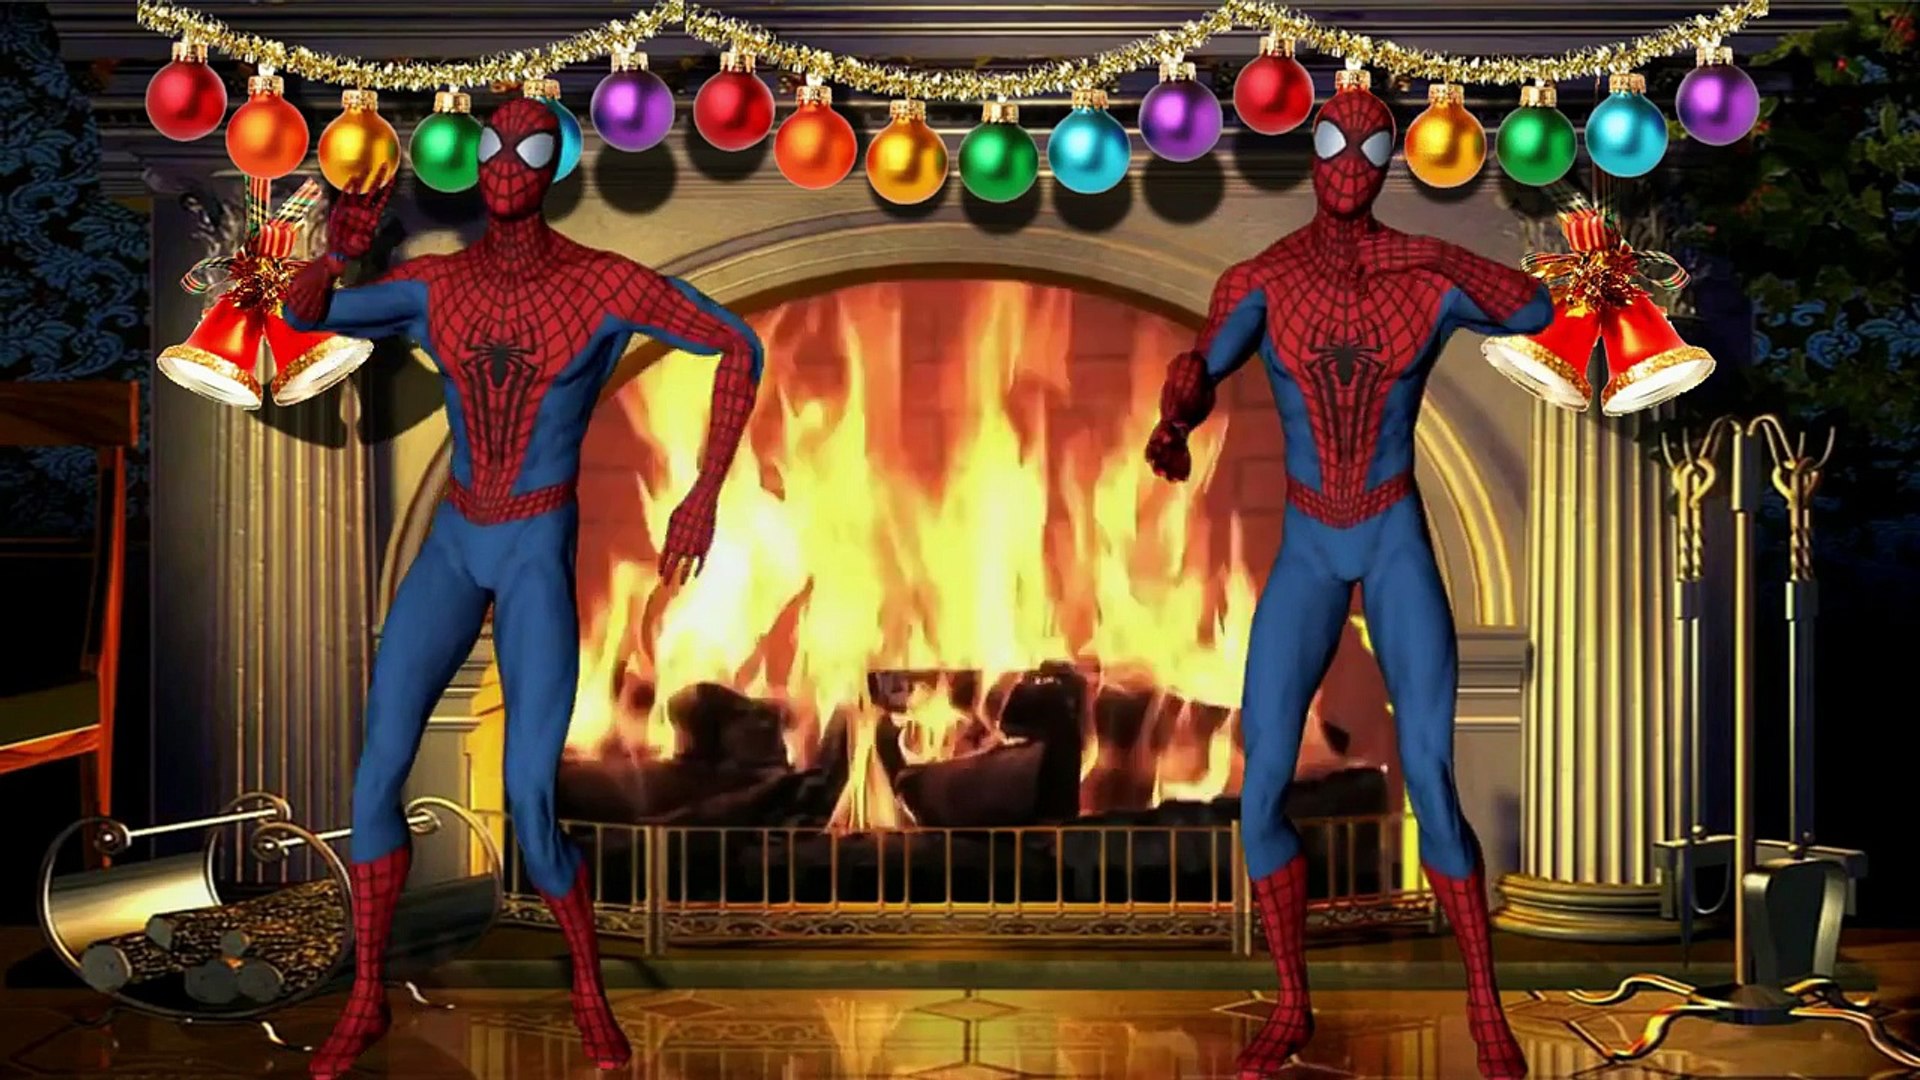 SPIDERMAN CHRISTMAS MUSIC and DANCE PARTY with Happy holidays Music and Videos